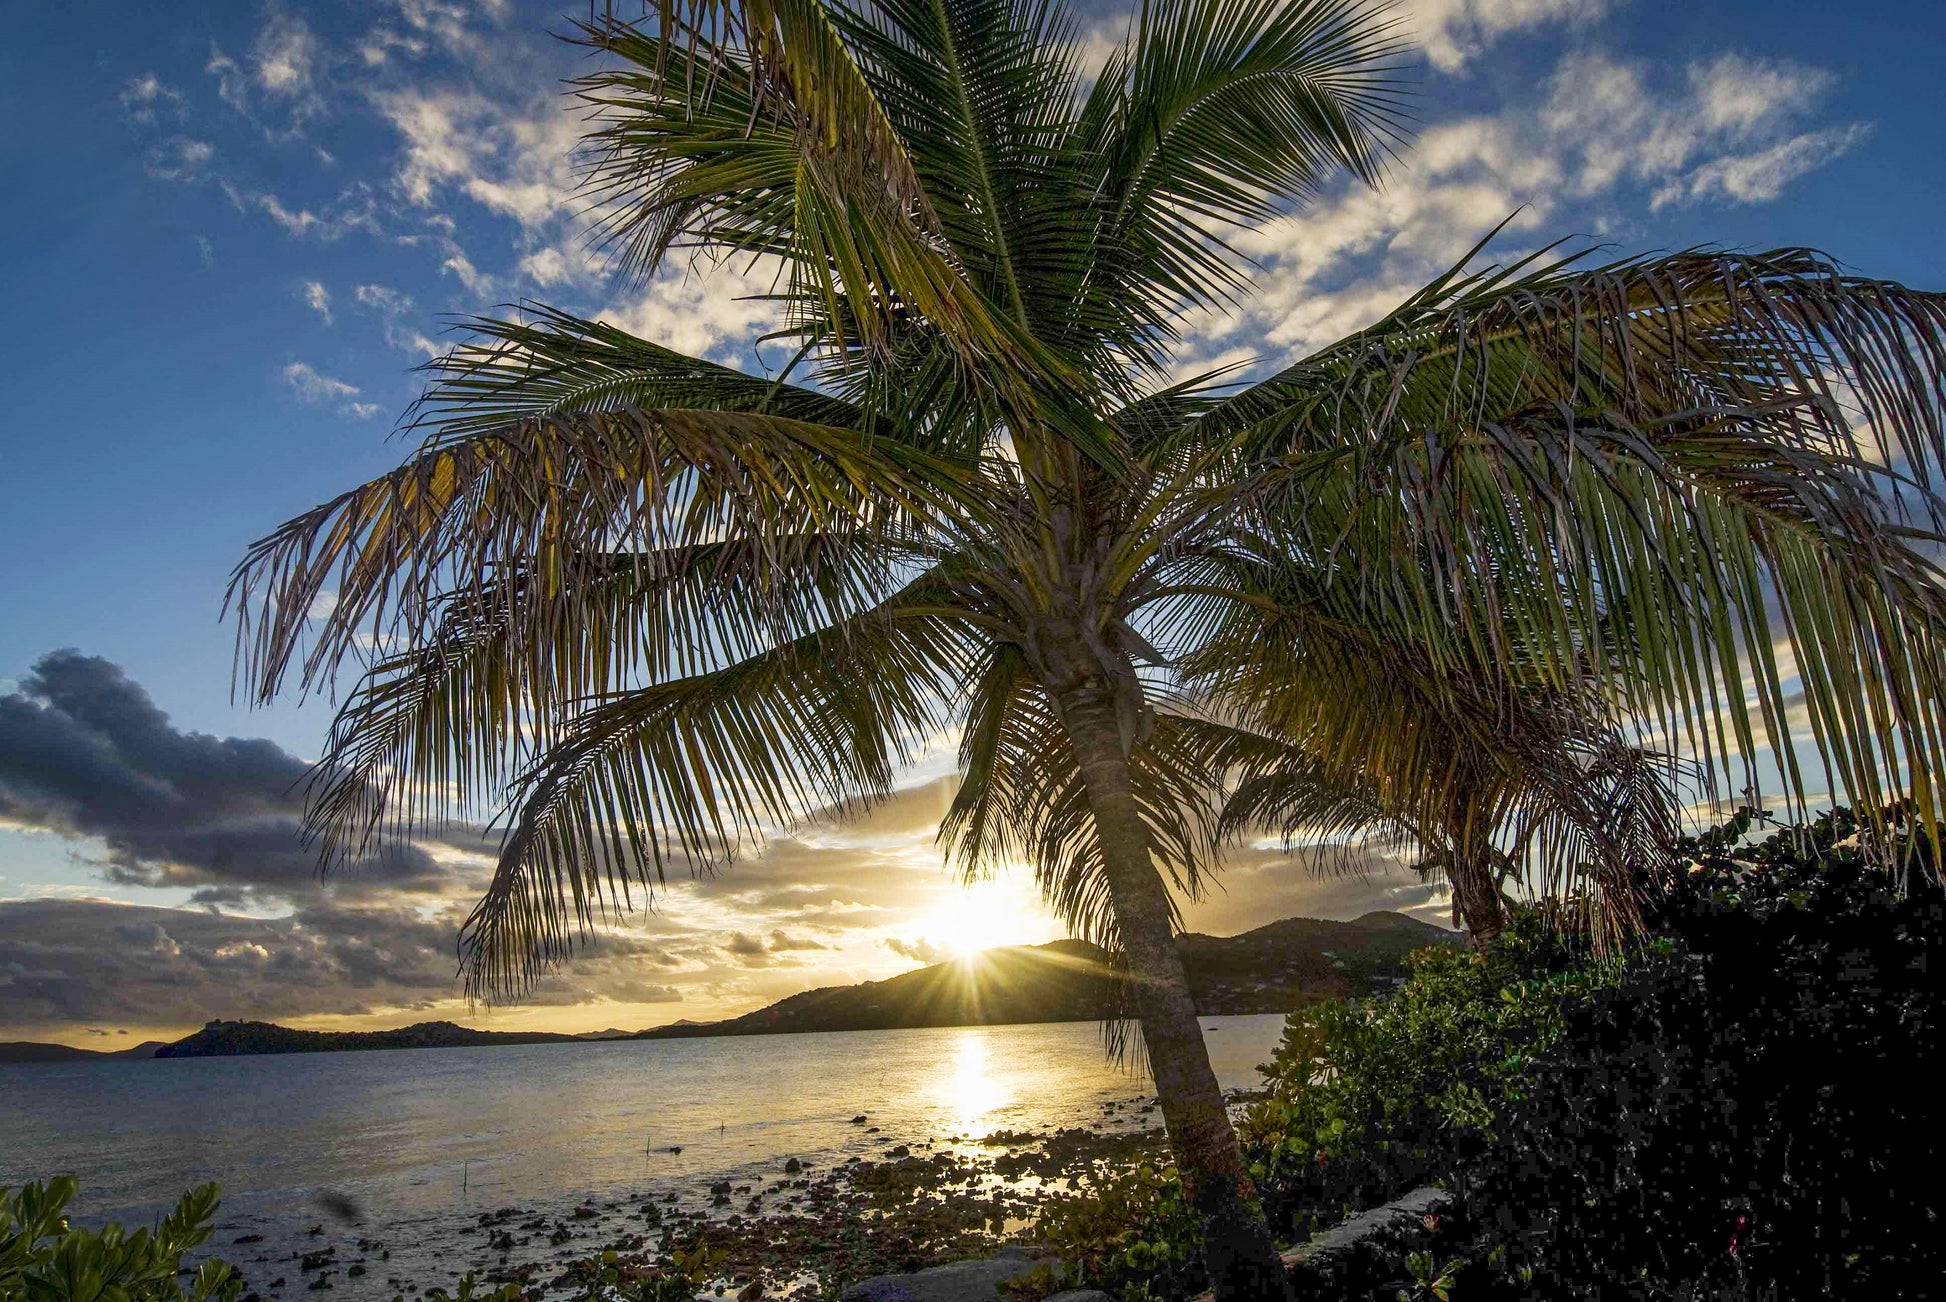 Alessandra Mattanza | LIGHT OF A MOMENT, Tortola, British Virgin Islands. A beautiful sunset over the coast of the island of Tortola. Available as an art print or a photographic print on acrylic glass.